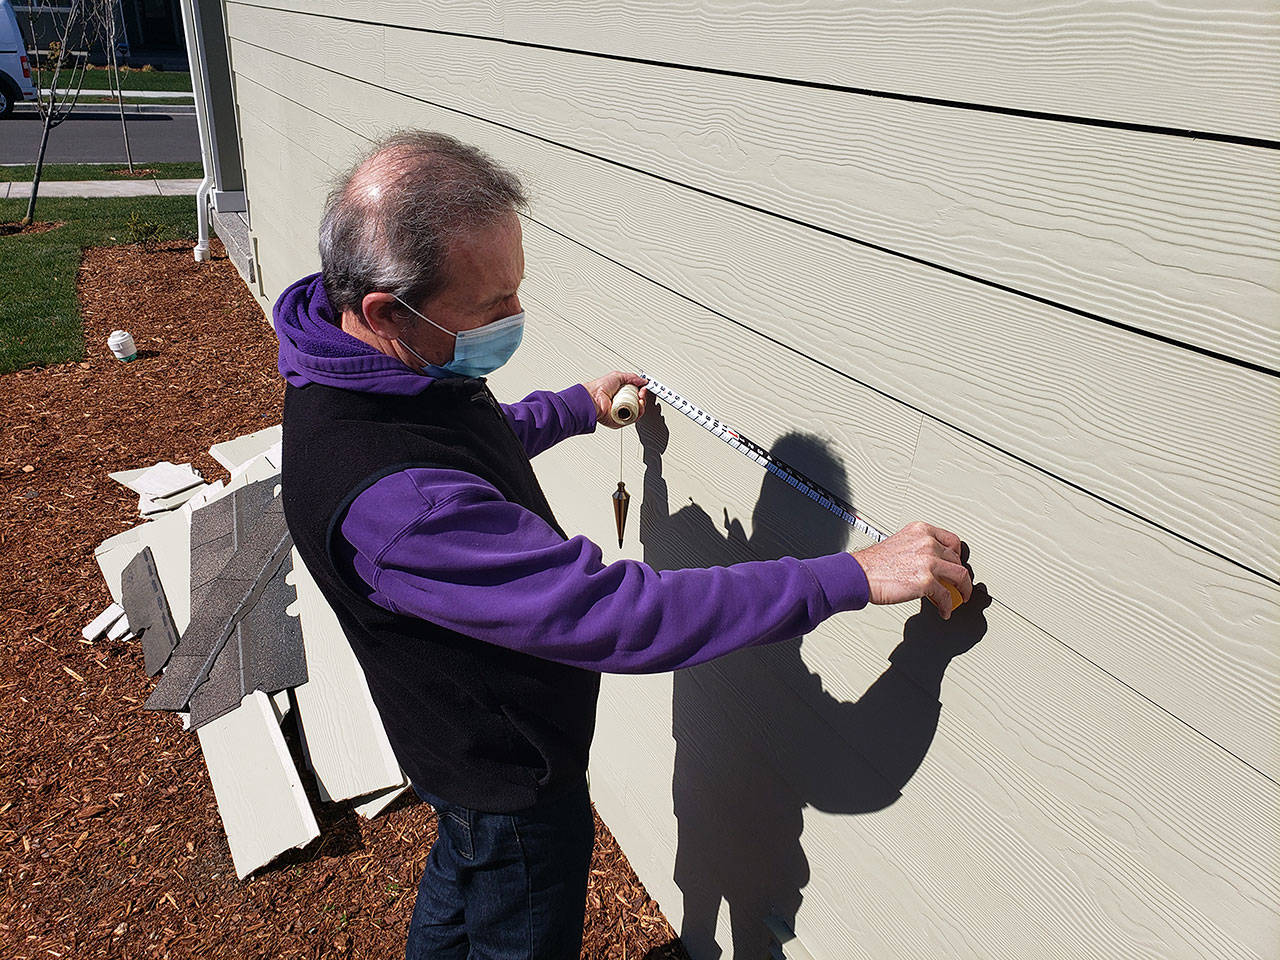 Photo by Ray Miller-Still 
Construction expert Will Martin taking some measurements of the siding of a house in Enumclaw’s Suntop Farms.
Construction expert Will Martin taking some measurement of the siding of a house in Enumclaw’s Suntop Farms. Photo by Ray Miller-Still